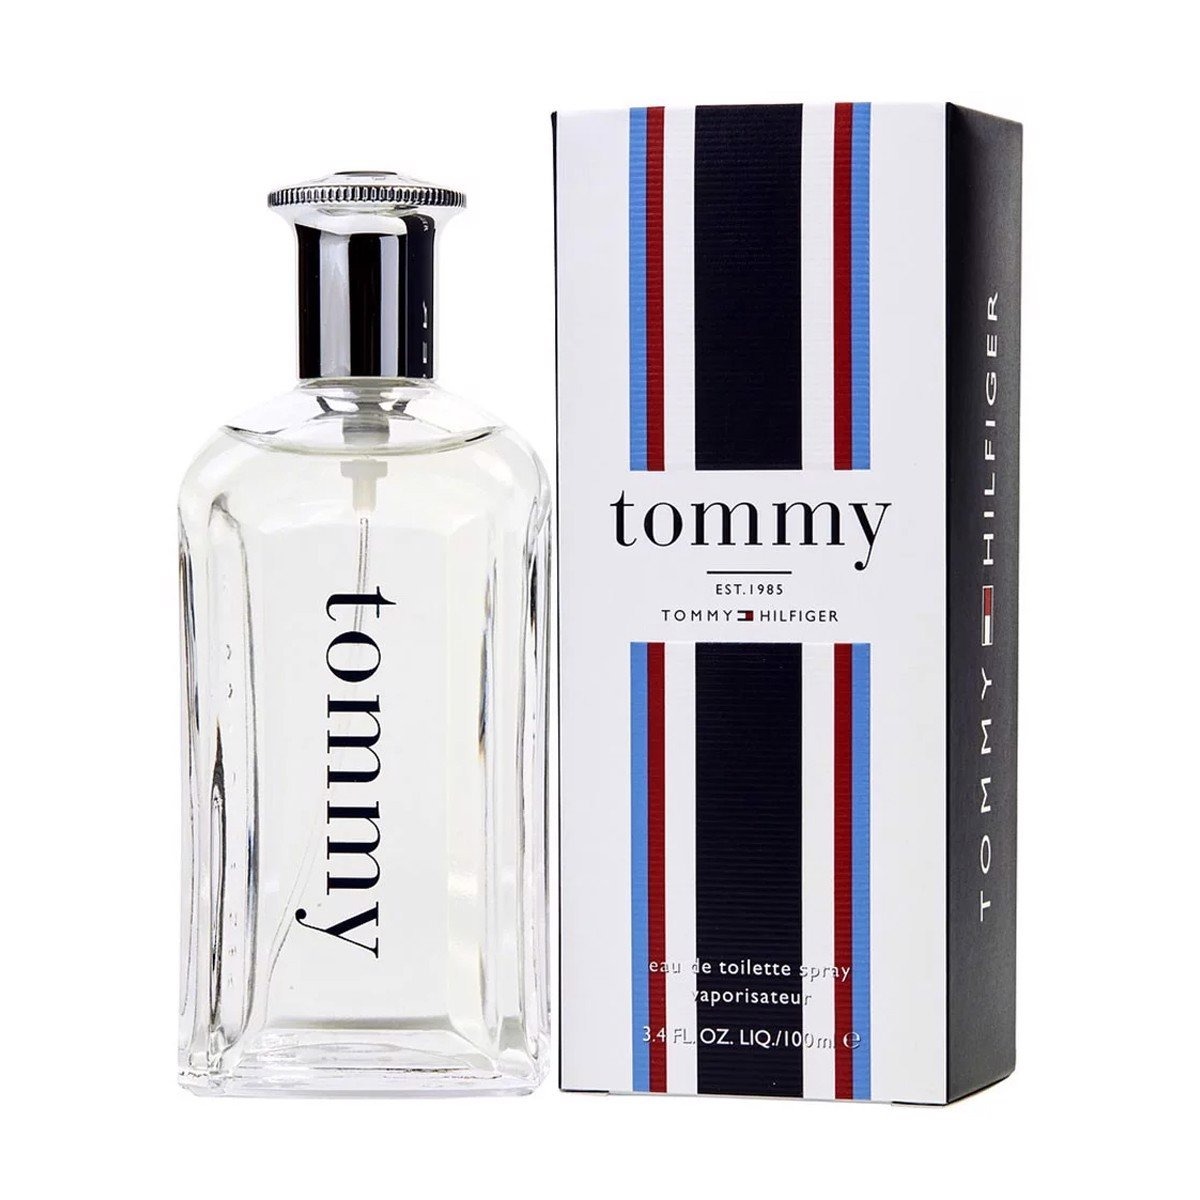 nuoc hoa tommy hilfiger tommy edt